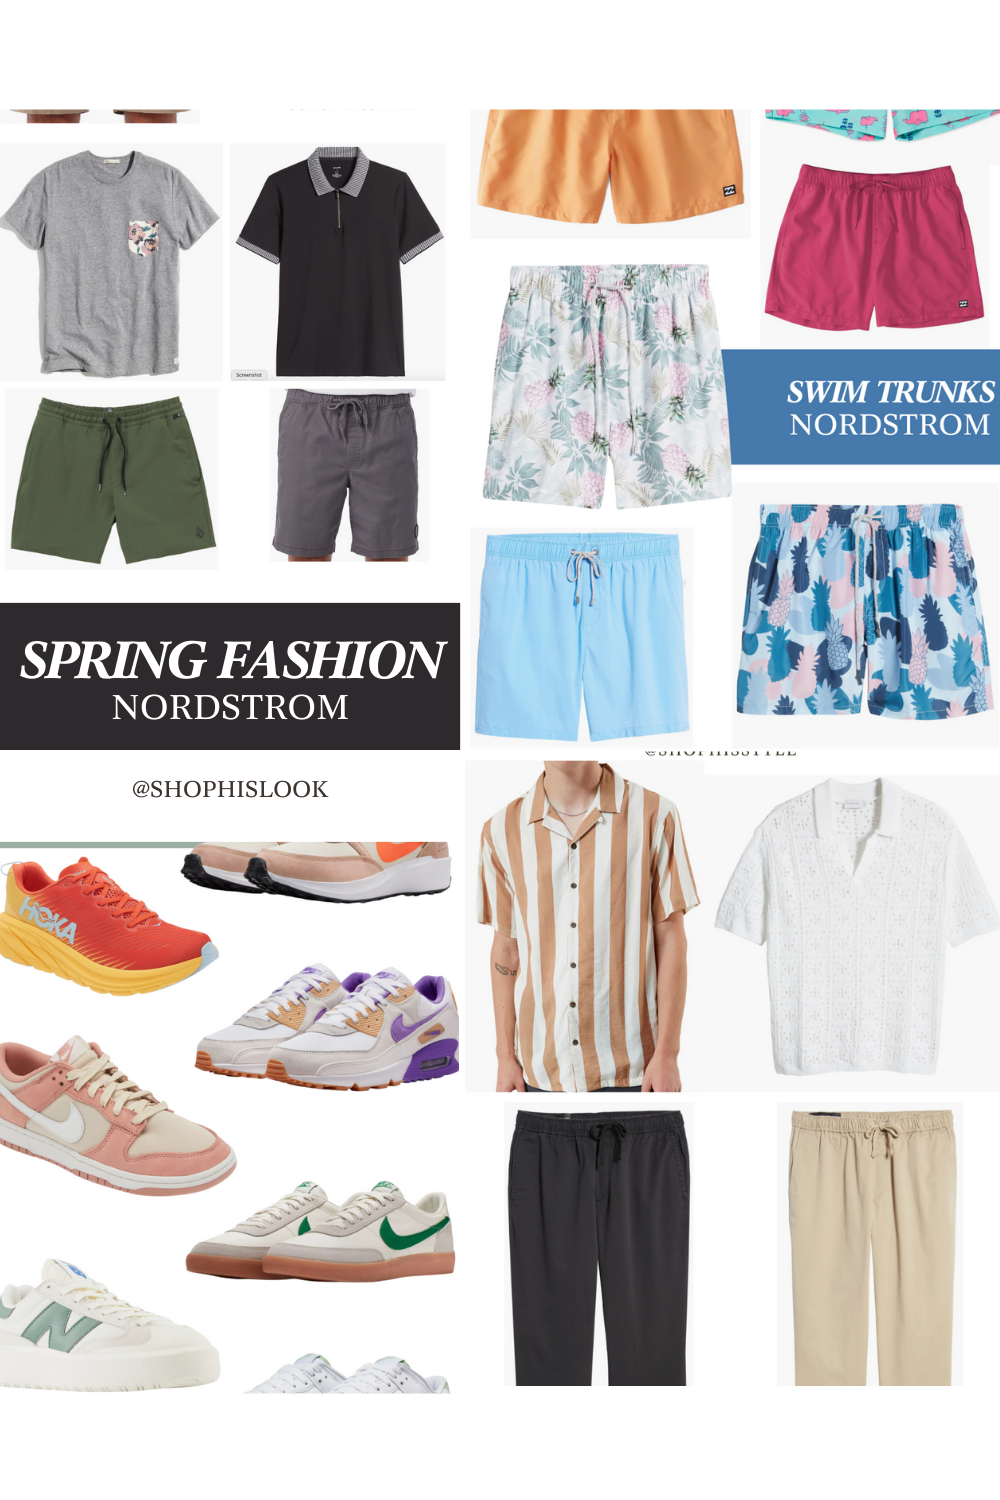 Men's Spring fashion recap from Nordstrom. Elastic shorts. Swim shorts. Colorful sneakers.